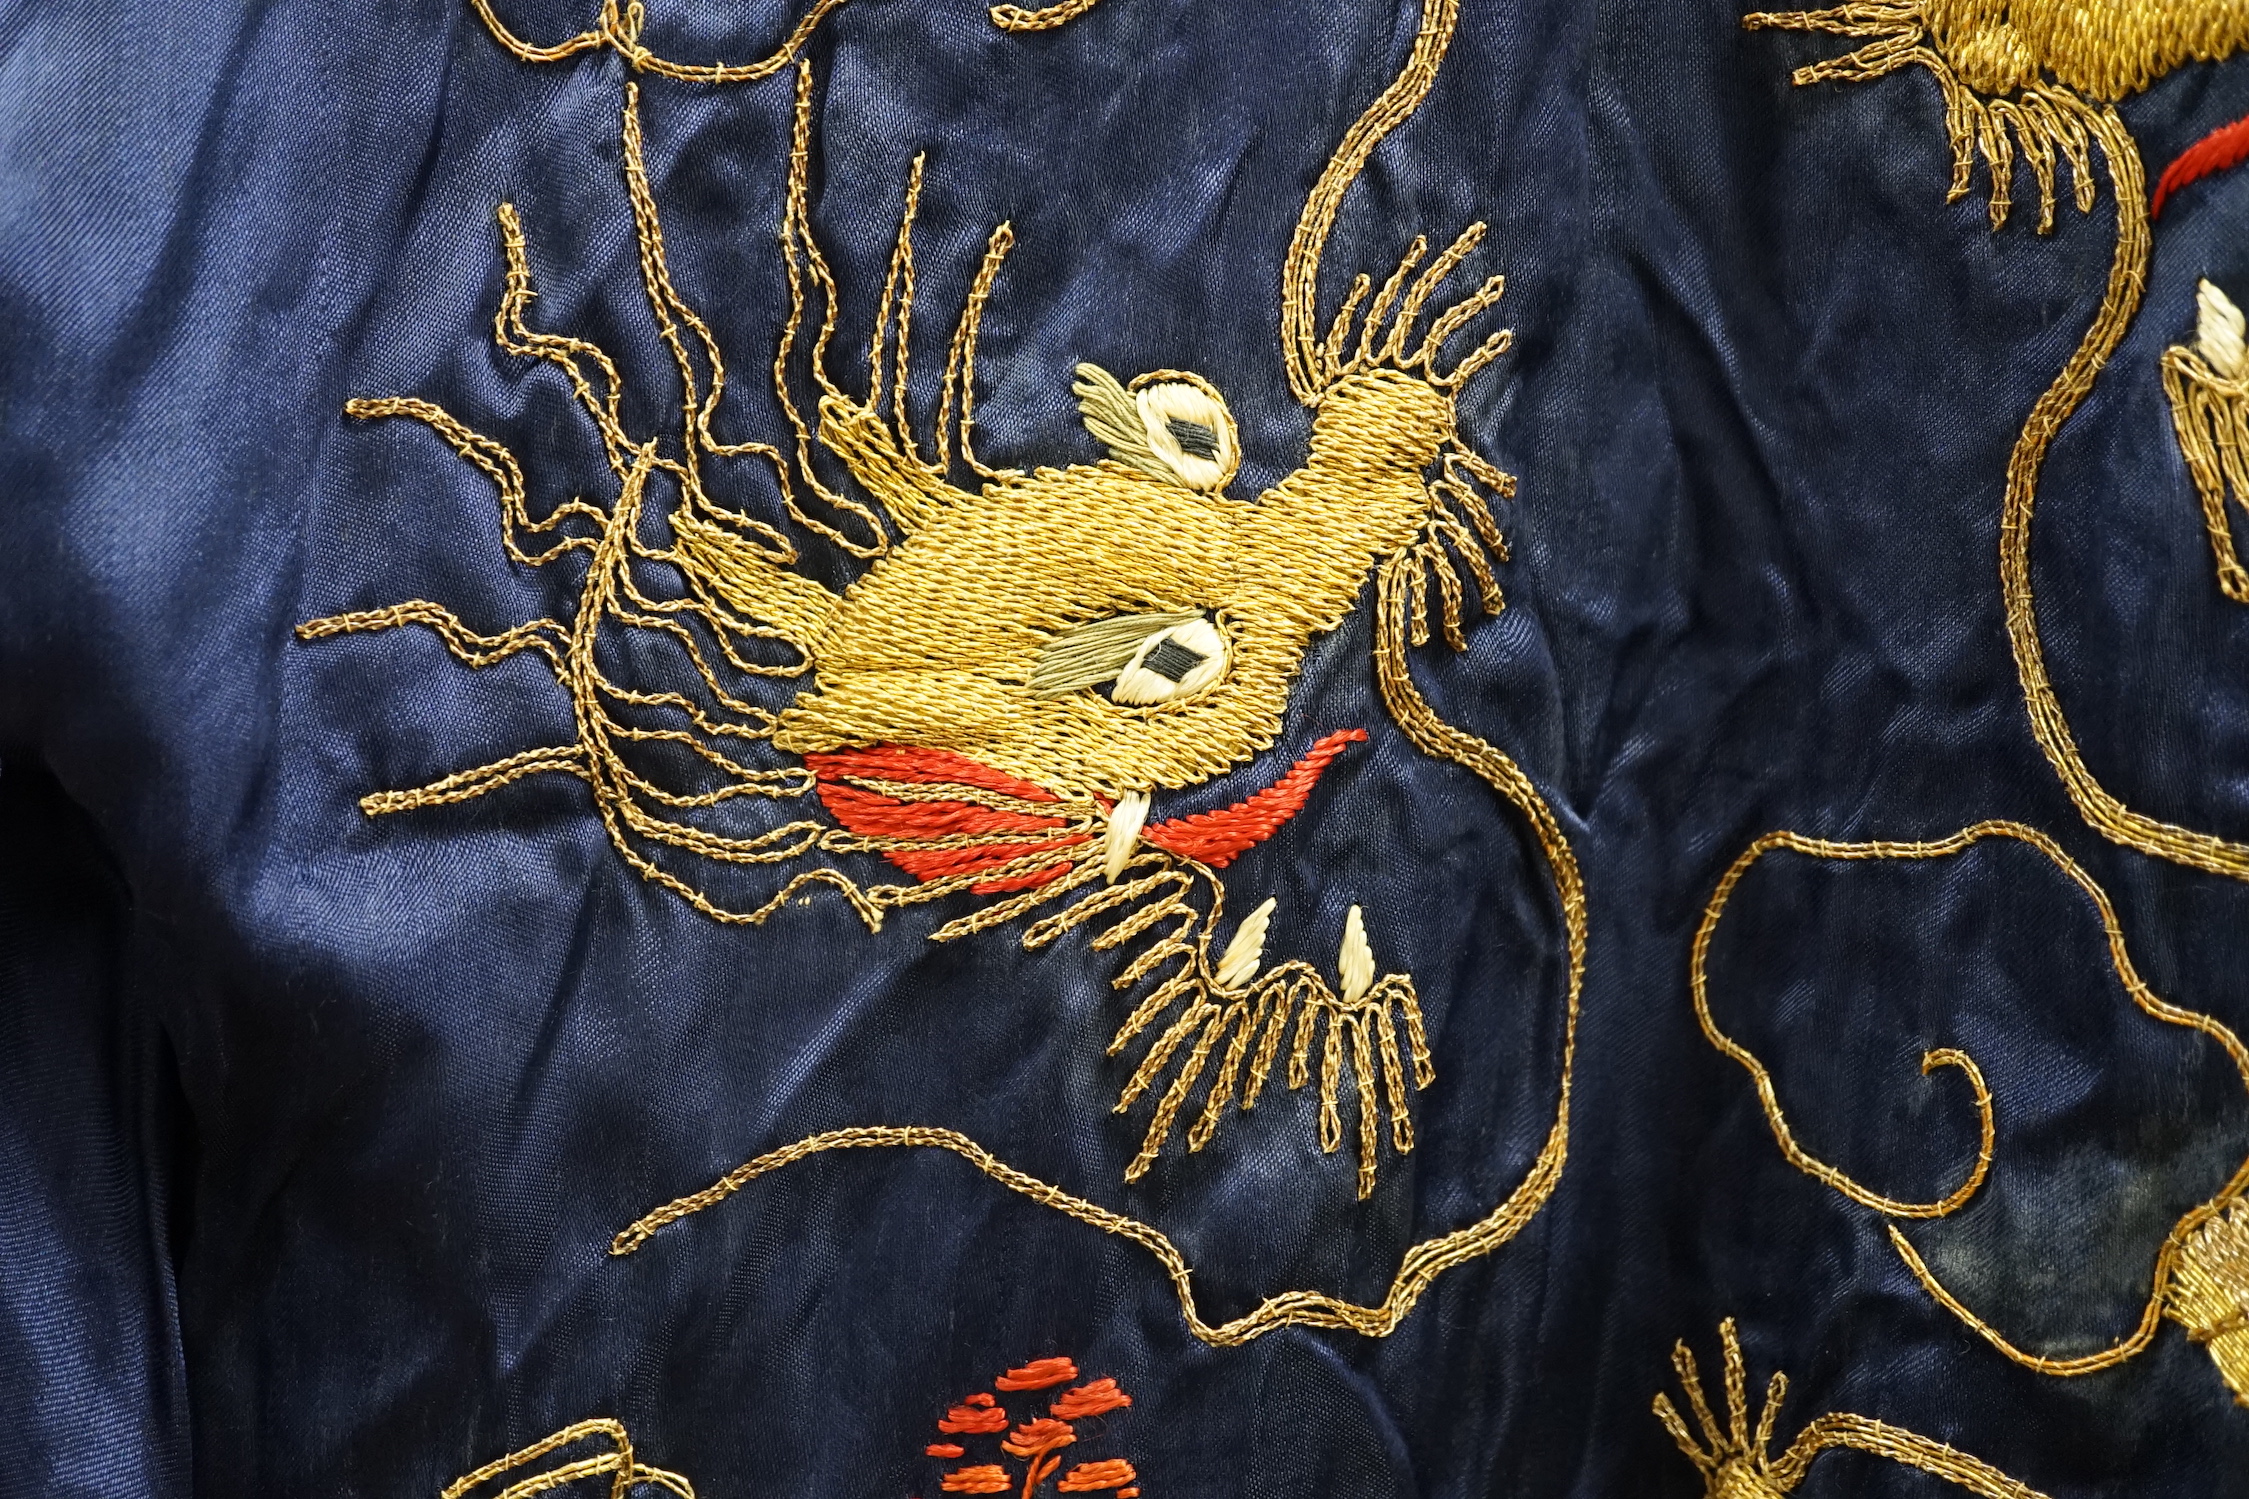 A Japanese ‘dragon’ robe with gold thread